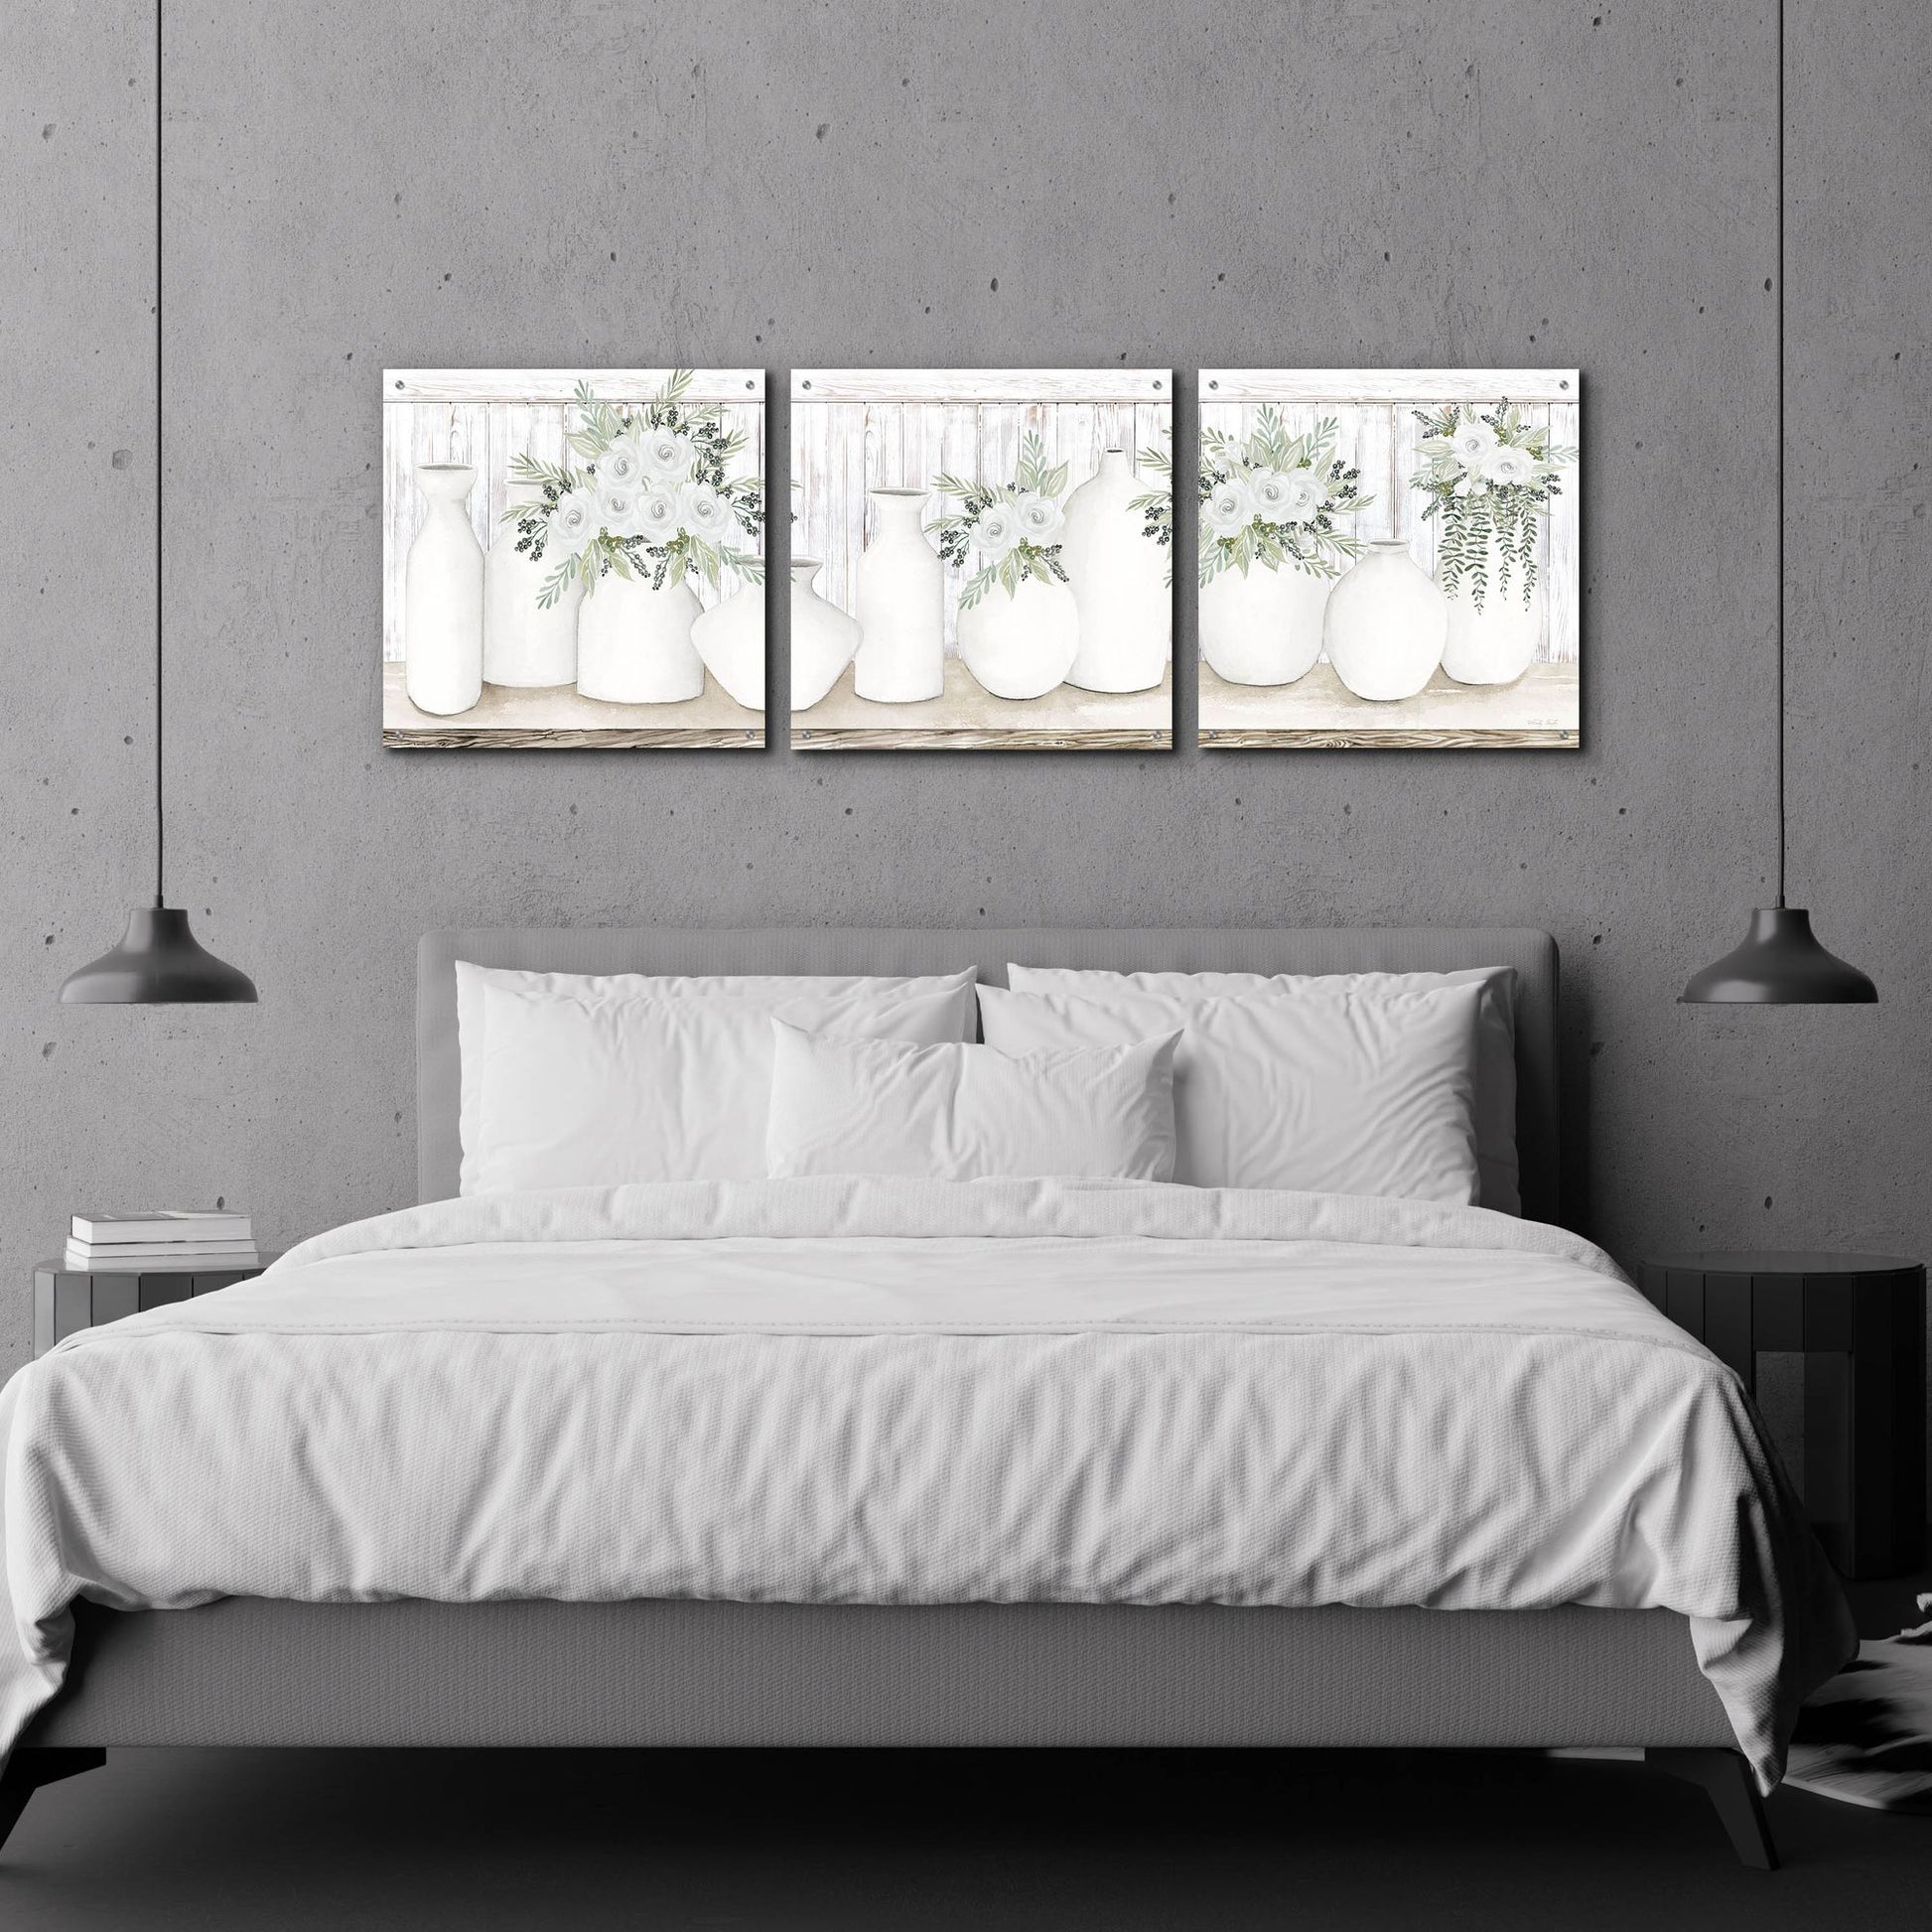 Epic Art 'White Simplicity' by Cindy Jacobs, Acrylic Glass Wall Art, 3 Piece Set,72x24